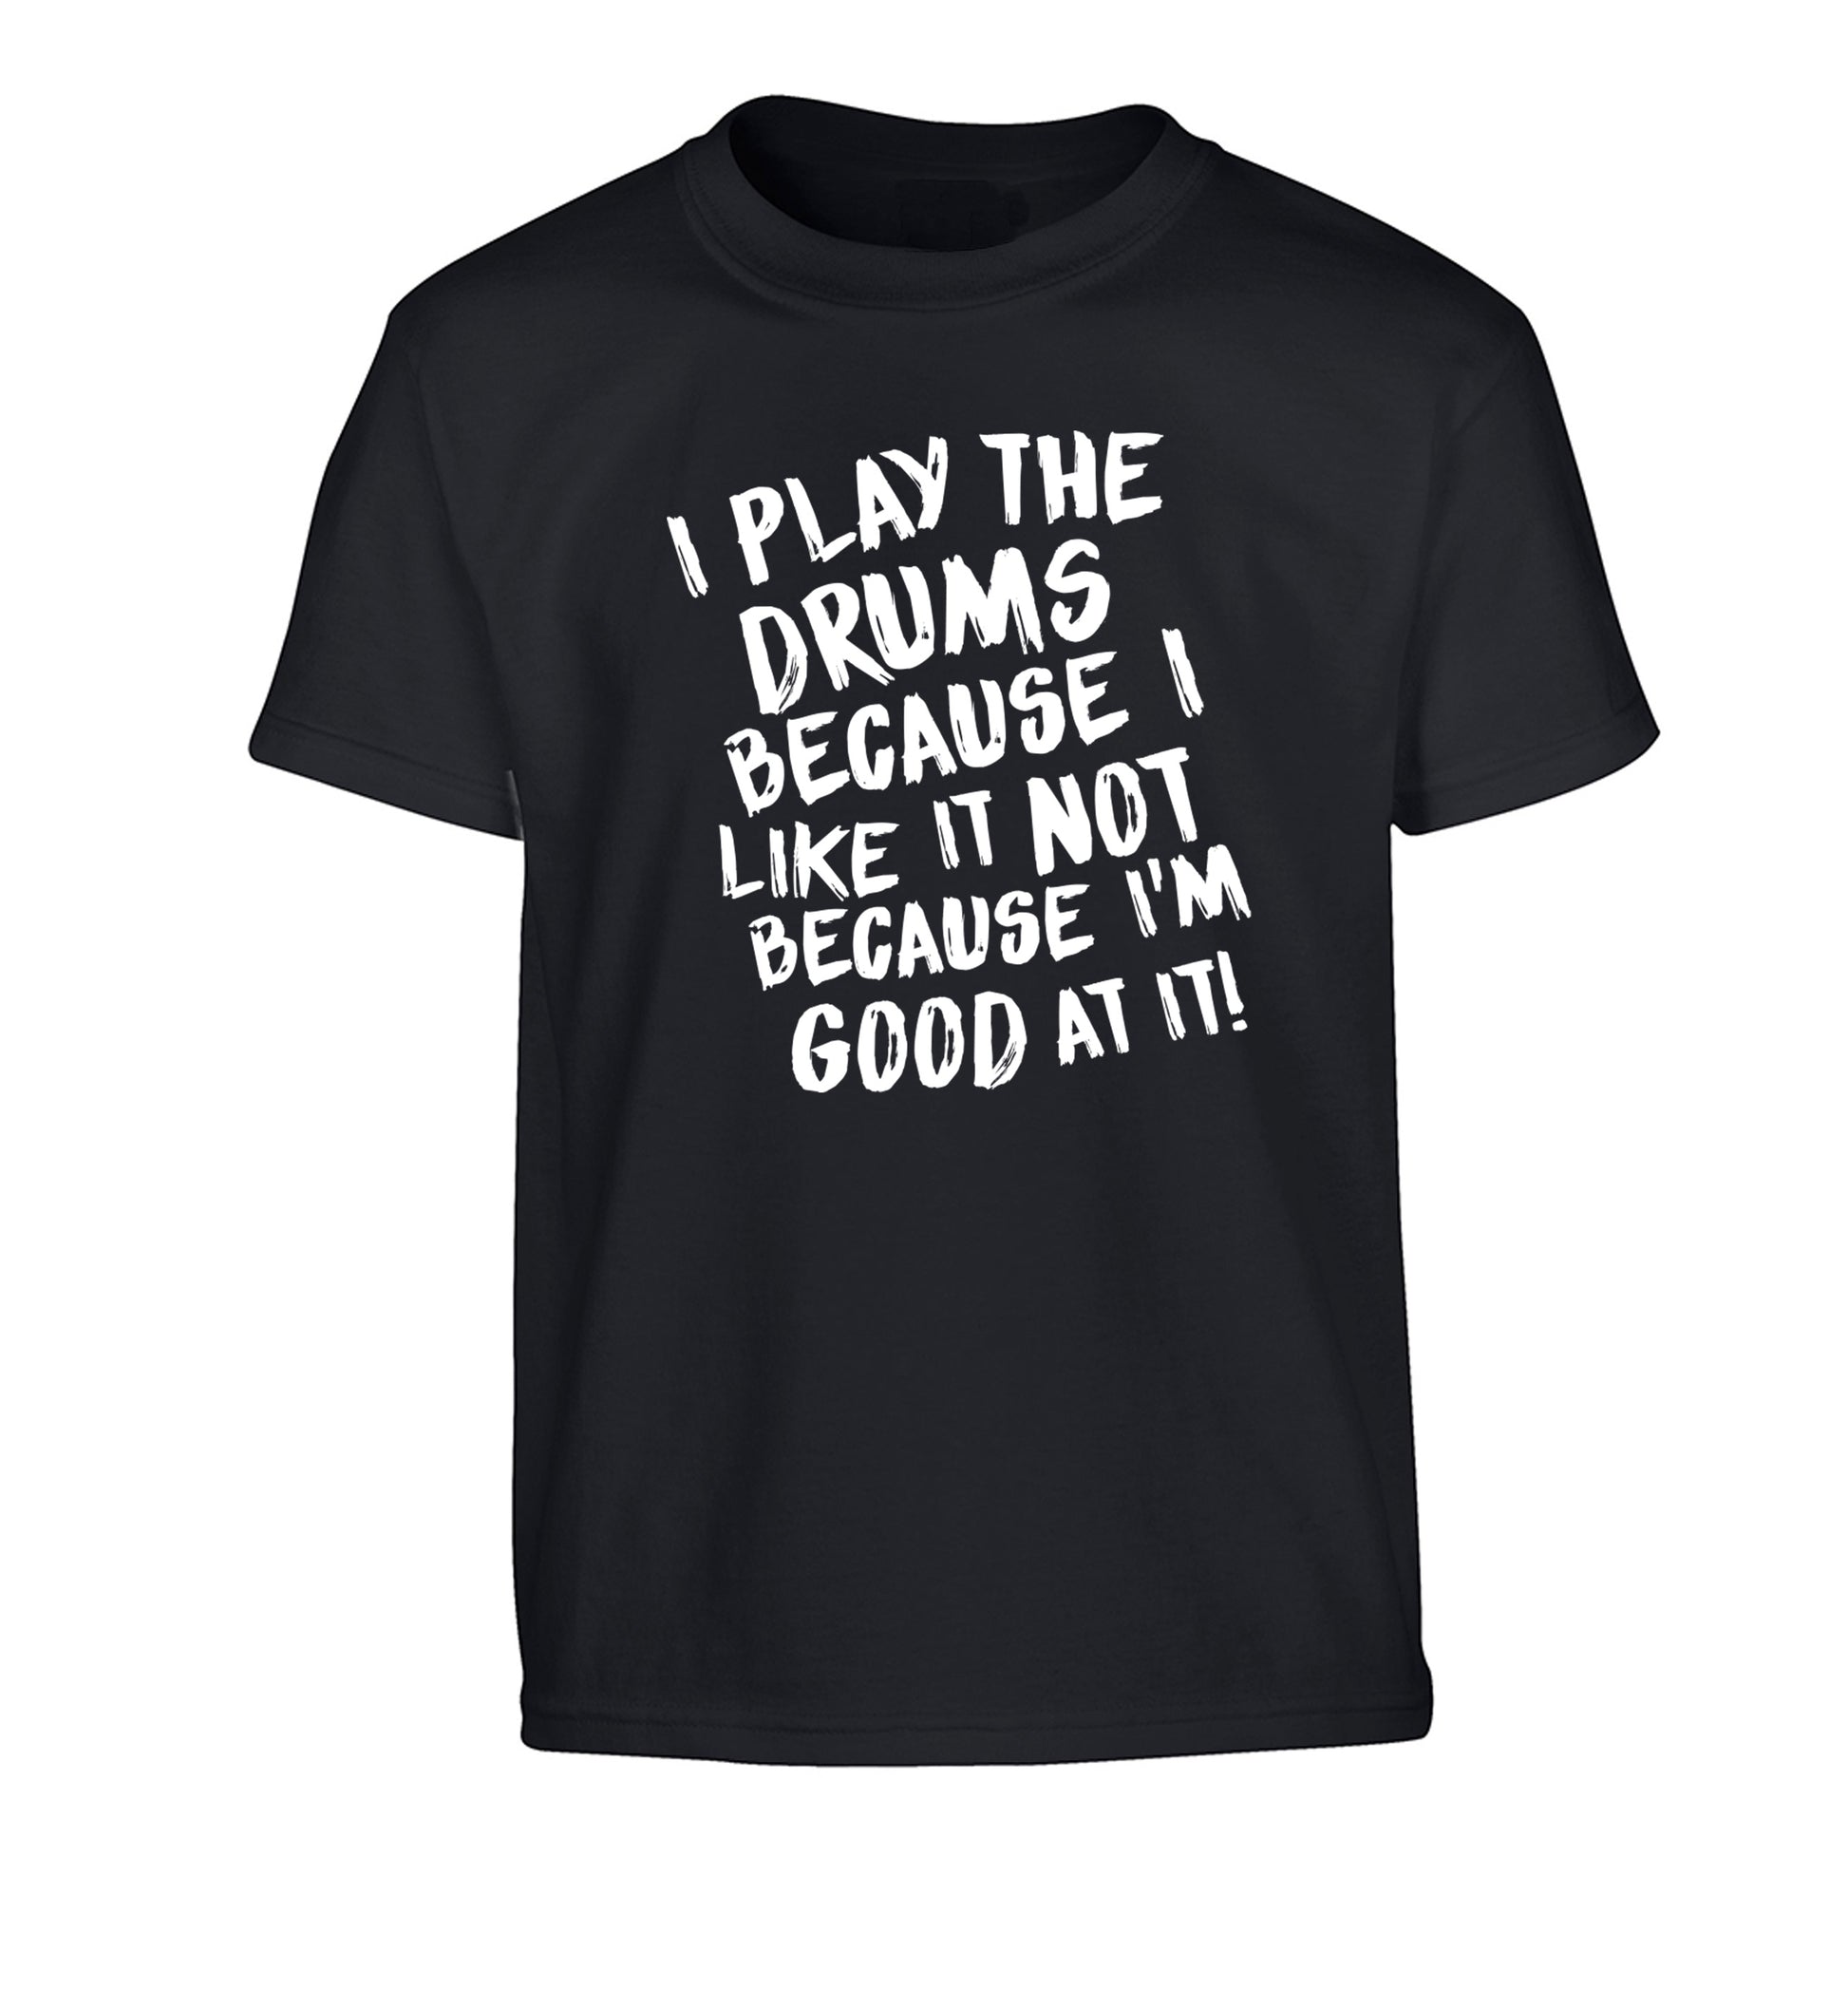 I play the drums because I like it not because I'm good at it Children's black Tshirt 12-14 Years